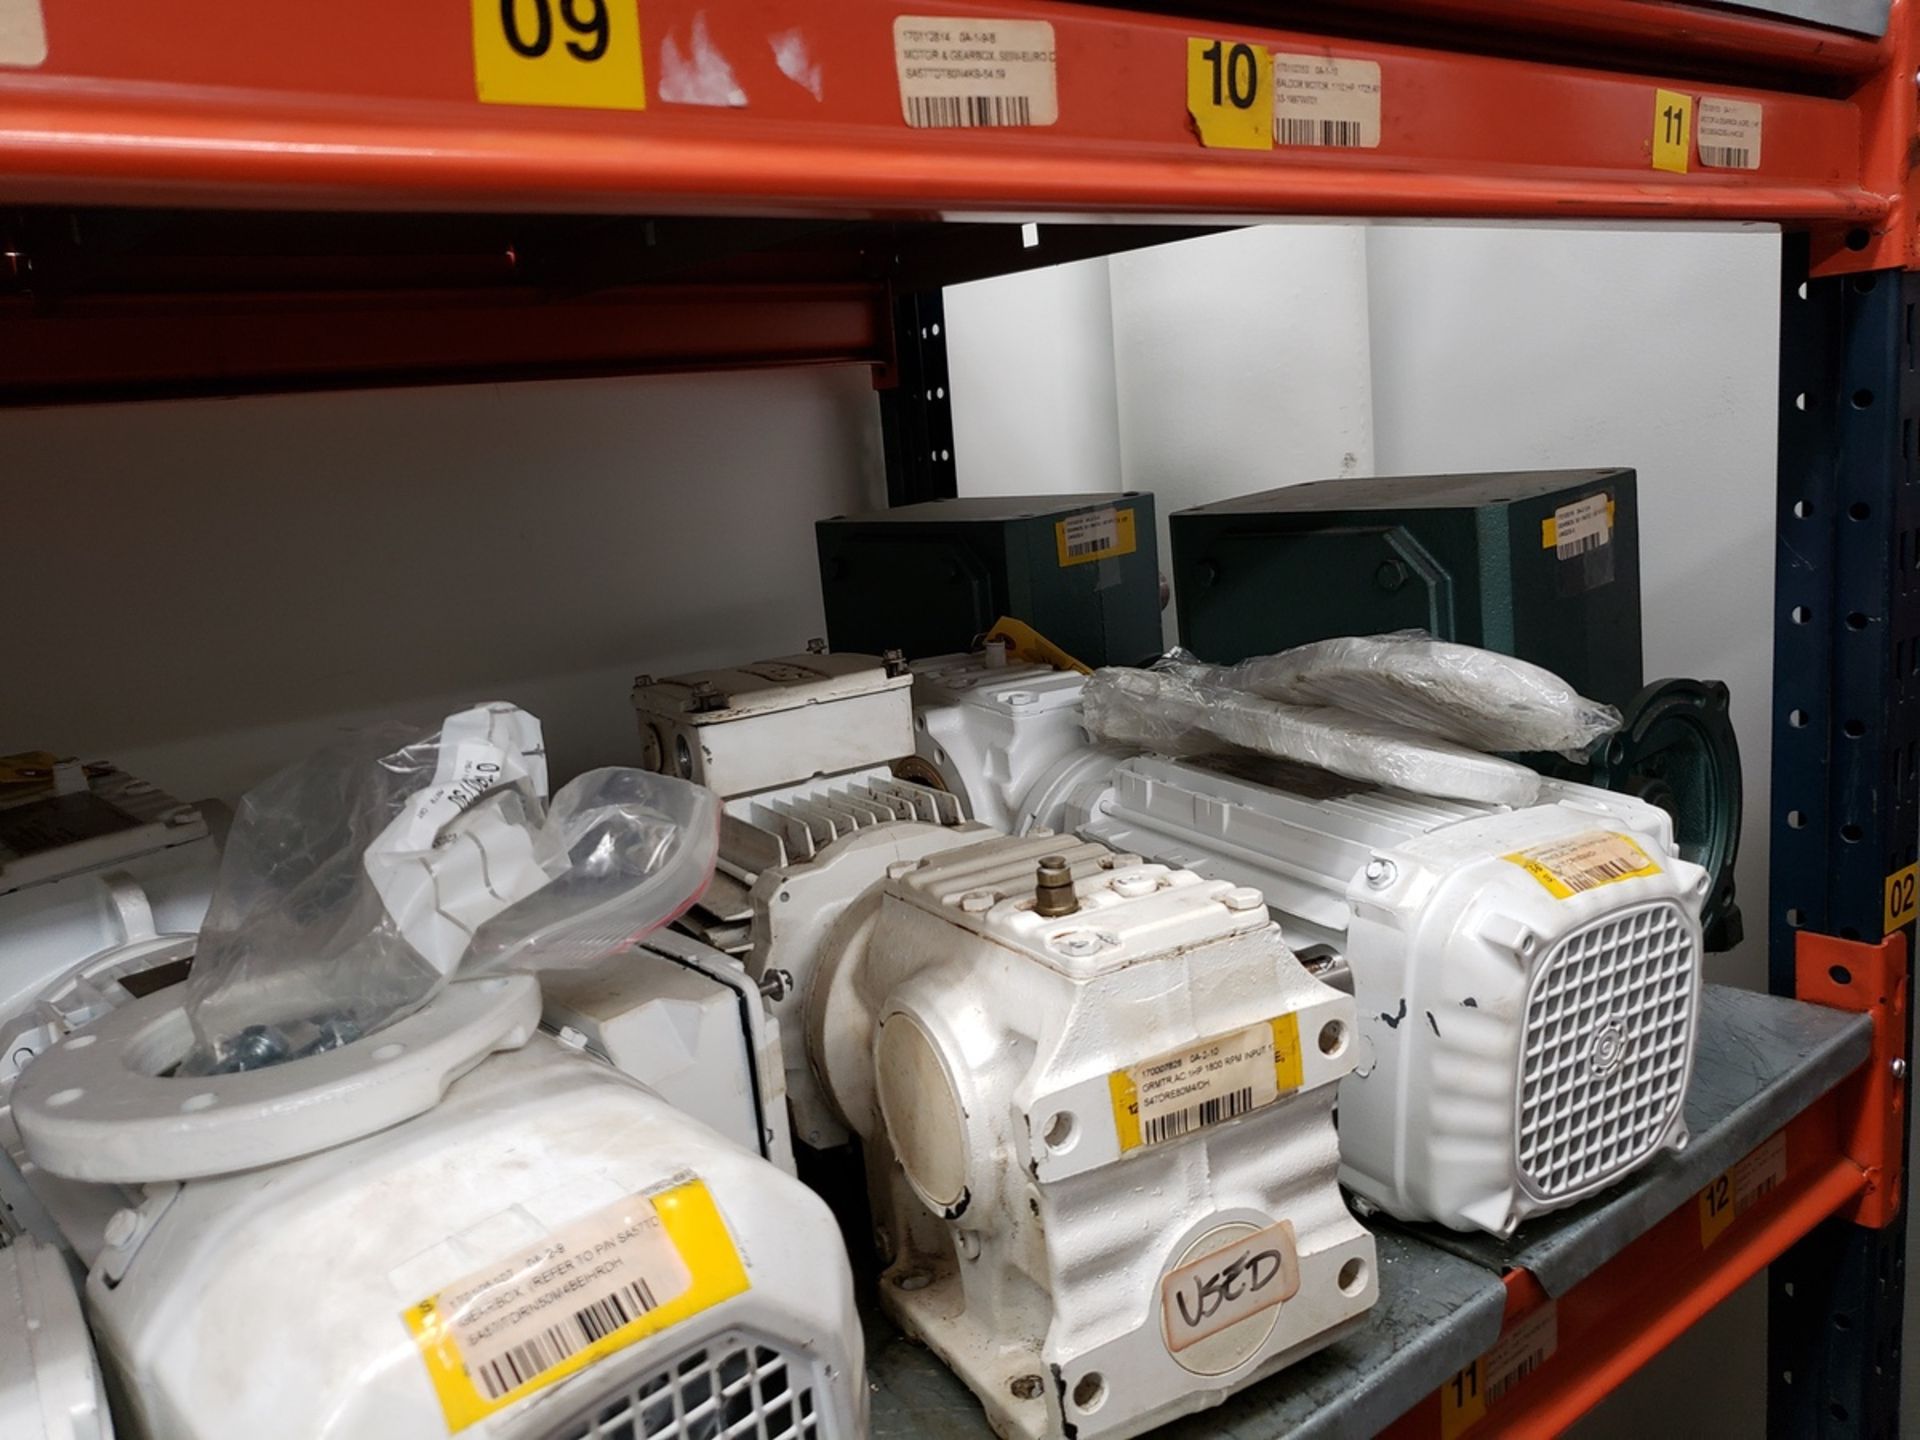 Lot of Pumps, Electric Motors & Gearboxes - Subj to Bulk | Reqd Rig Fee: $100 - Image 6 of 6